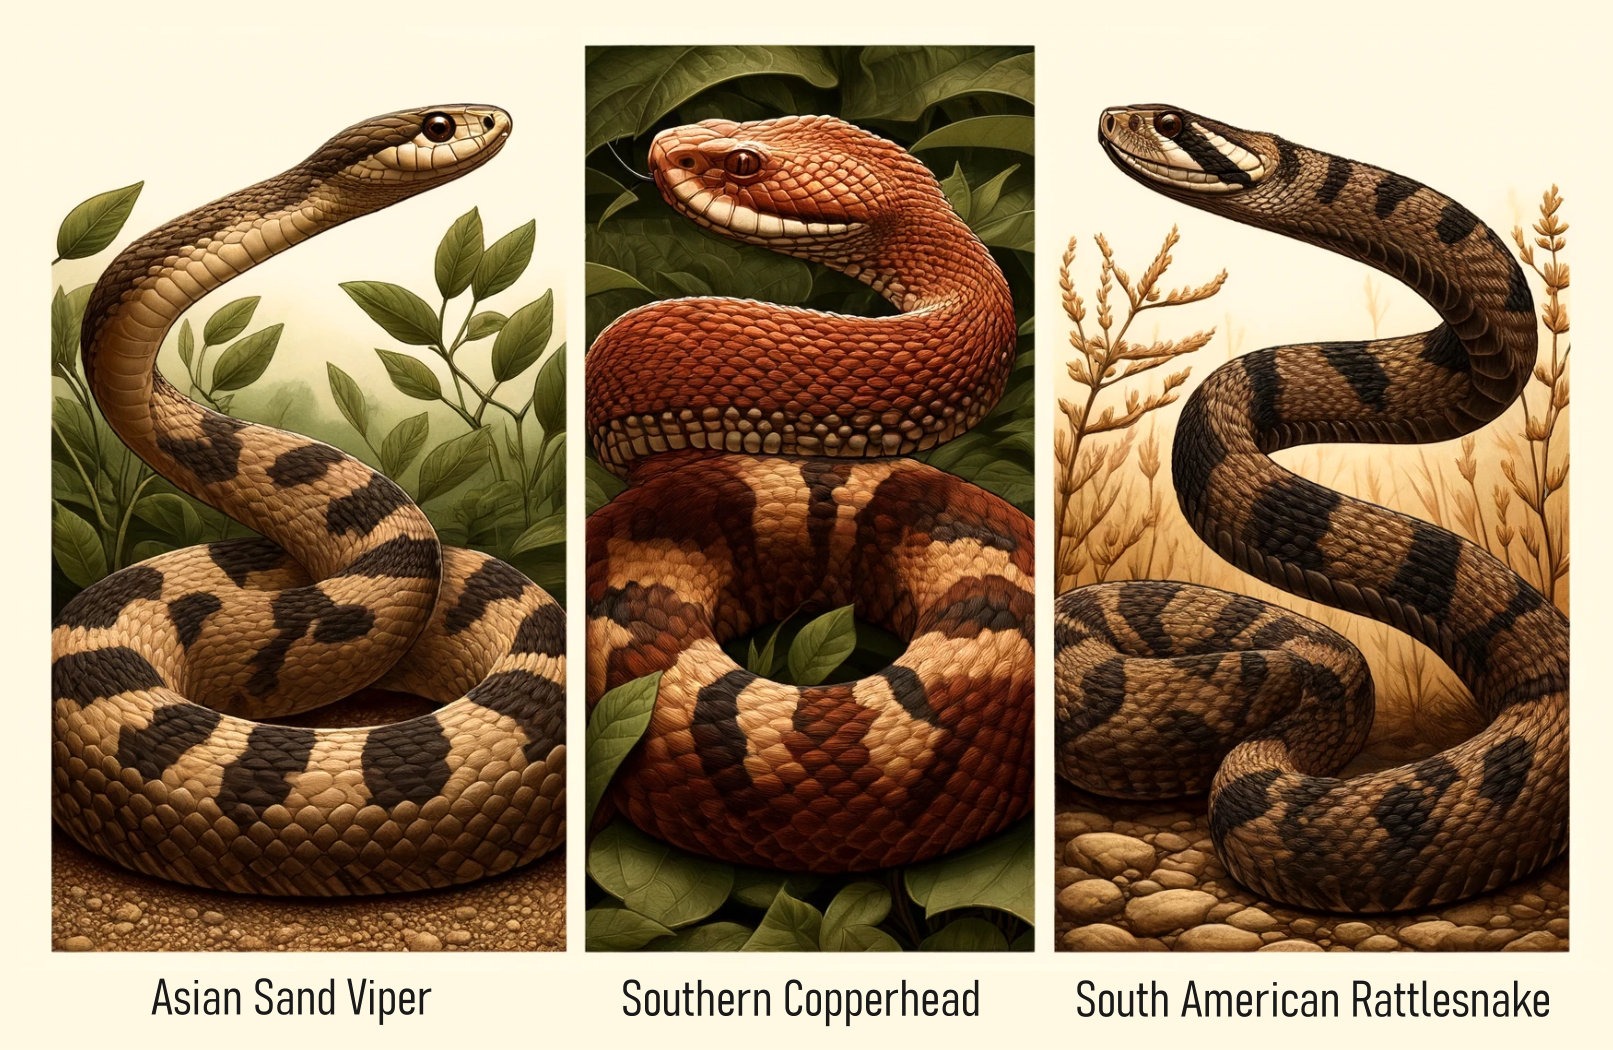 Three venomous snakes each segmented in three panels; Asian Sand Viper, Southern Copperhead, and the South American Rattlesnake.